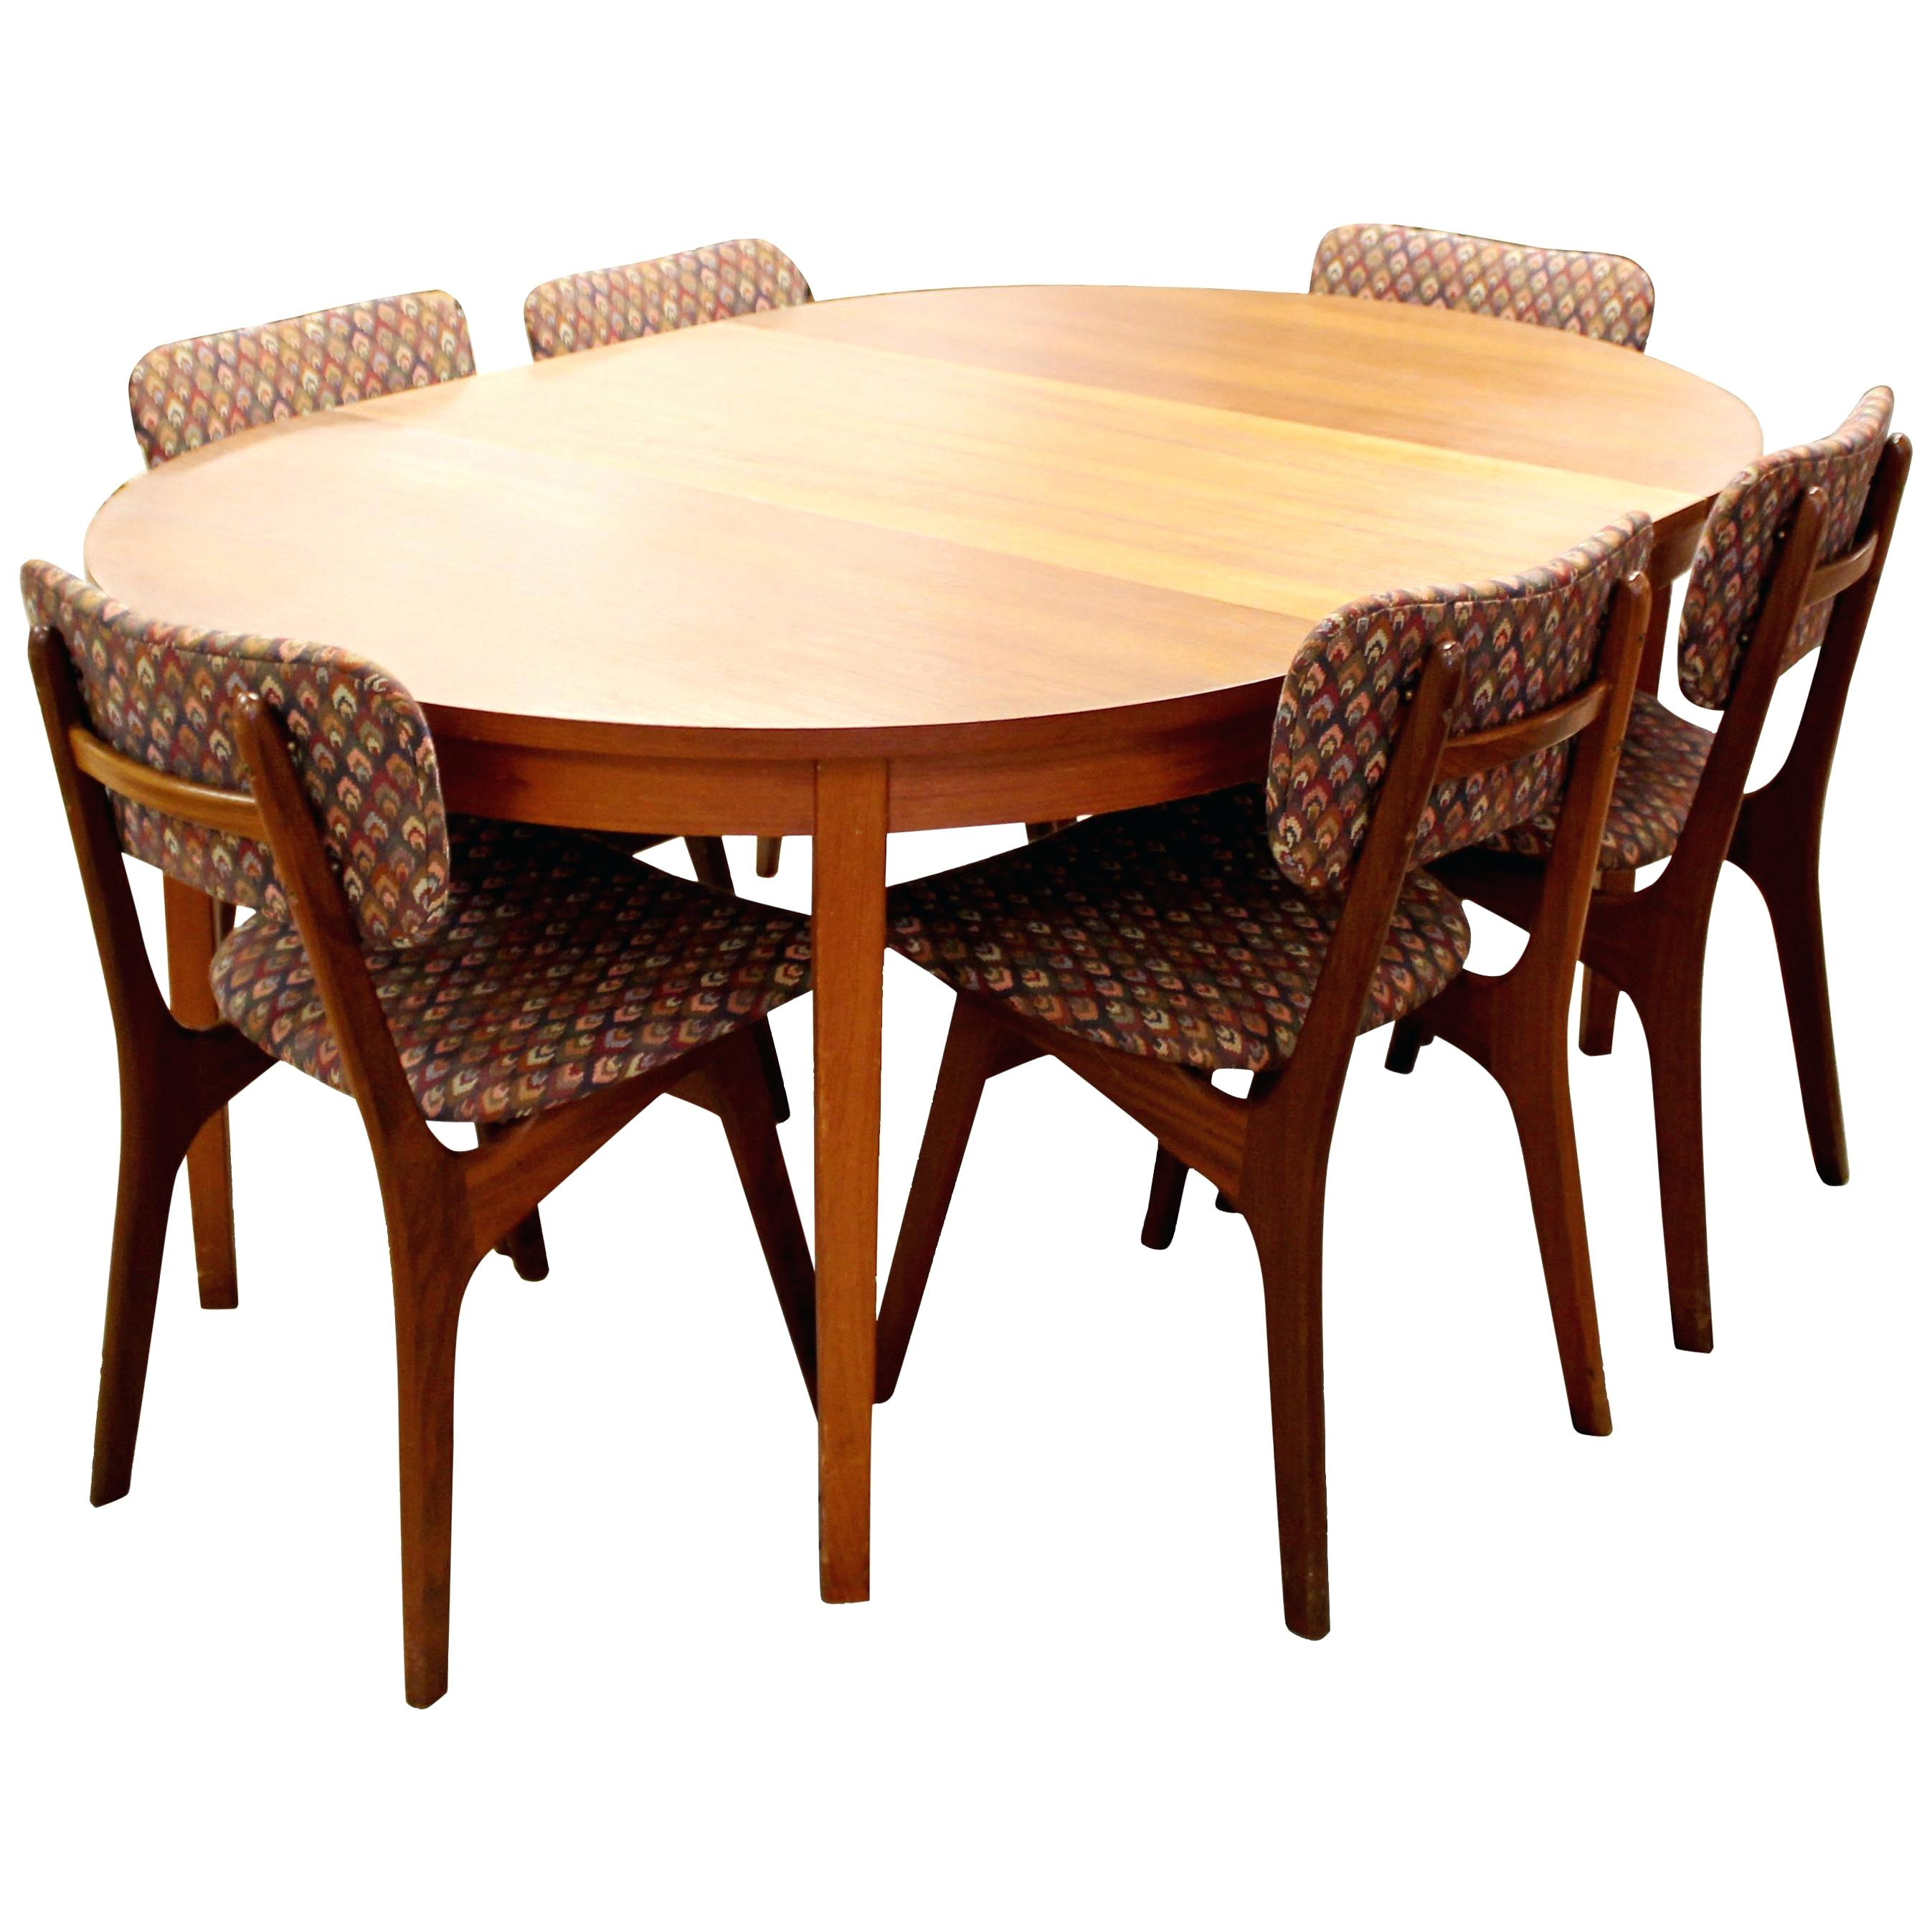 Oval Dining Table For 6 Tacomexboston throughout proportions 2694 X 2694